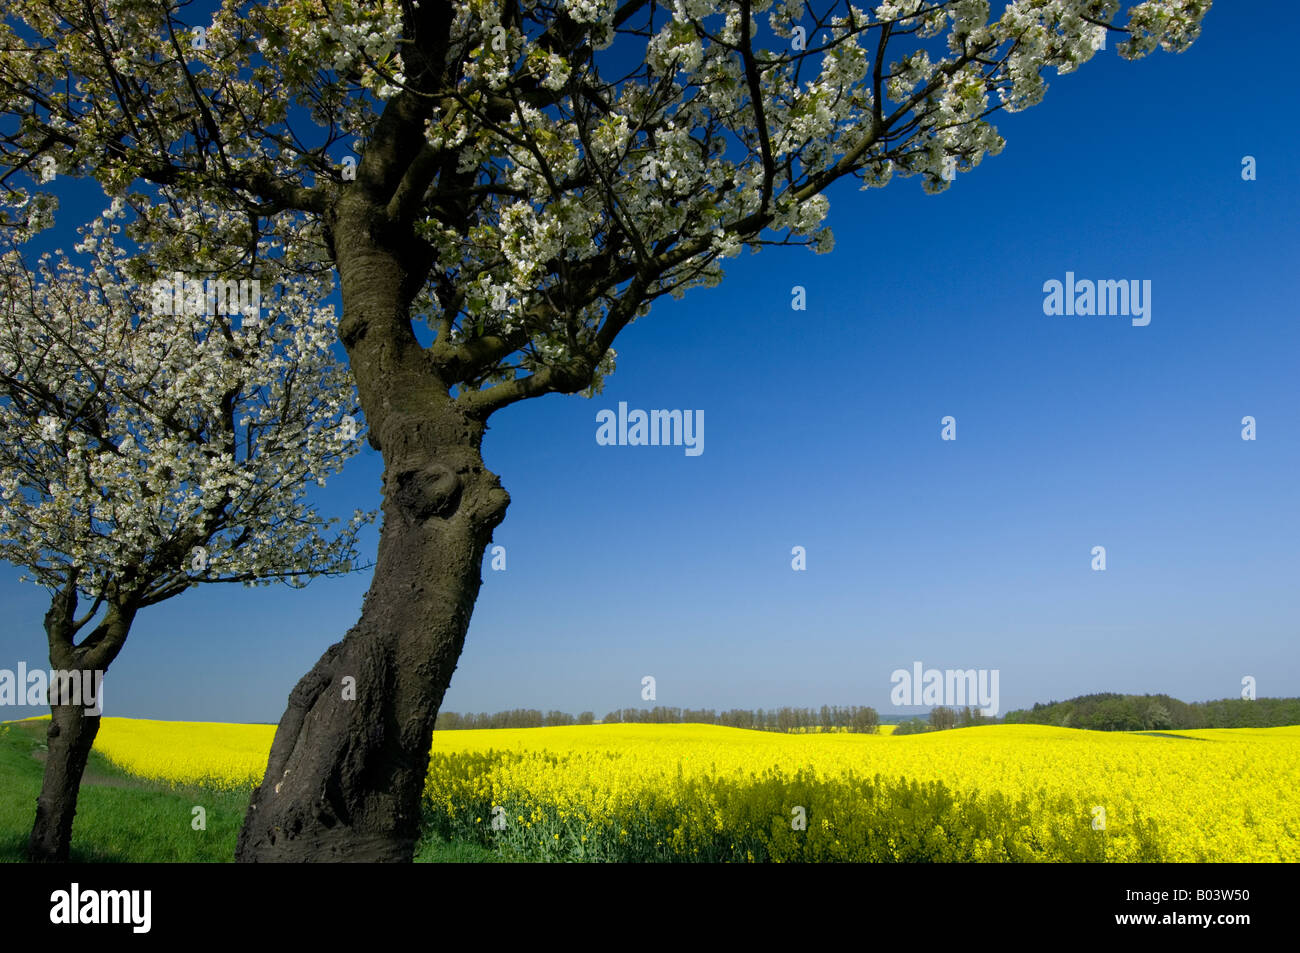 Blooming cherrytrees in spring germany cherrytree Stock Photo